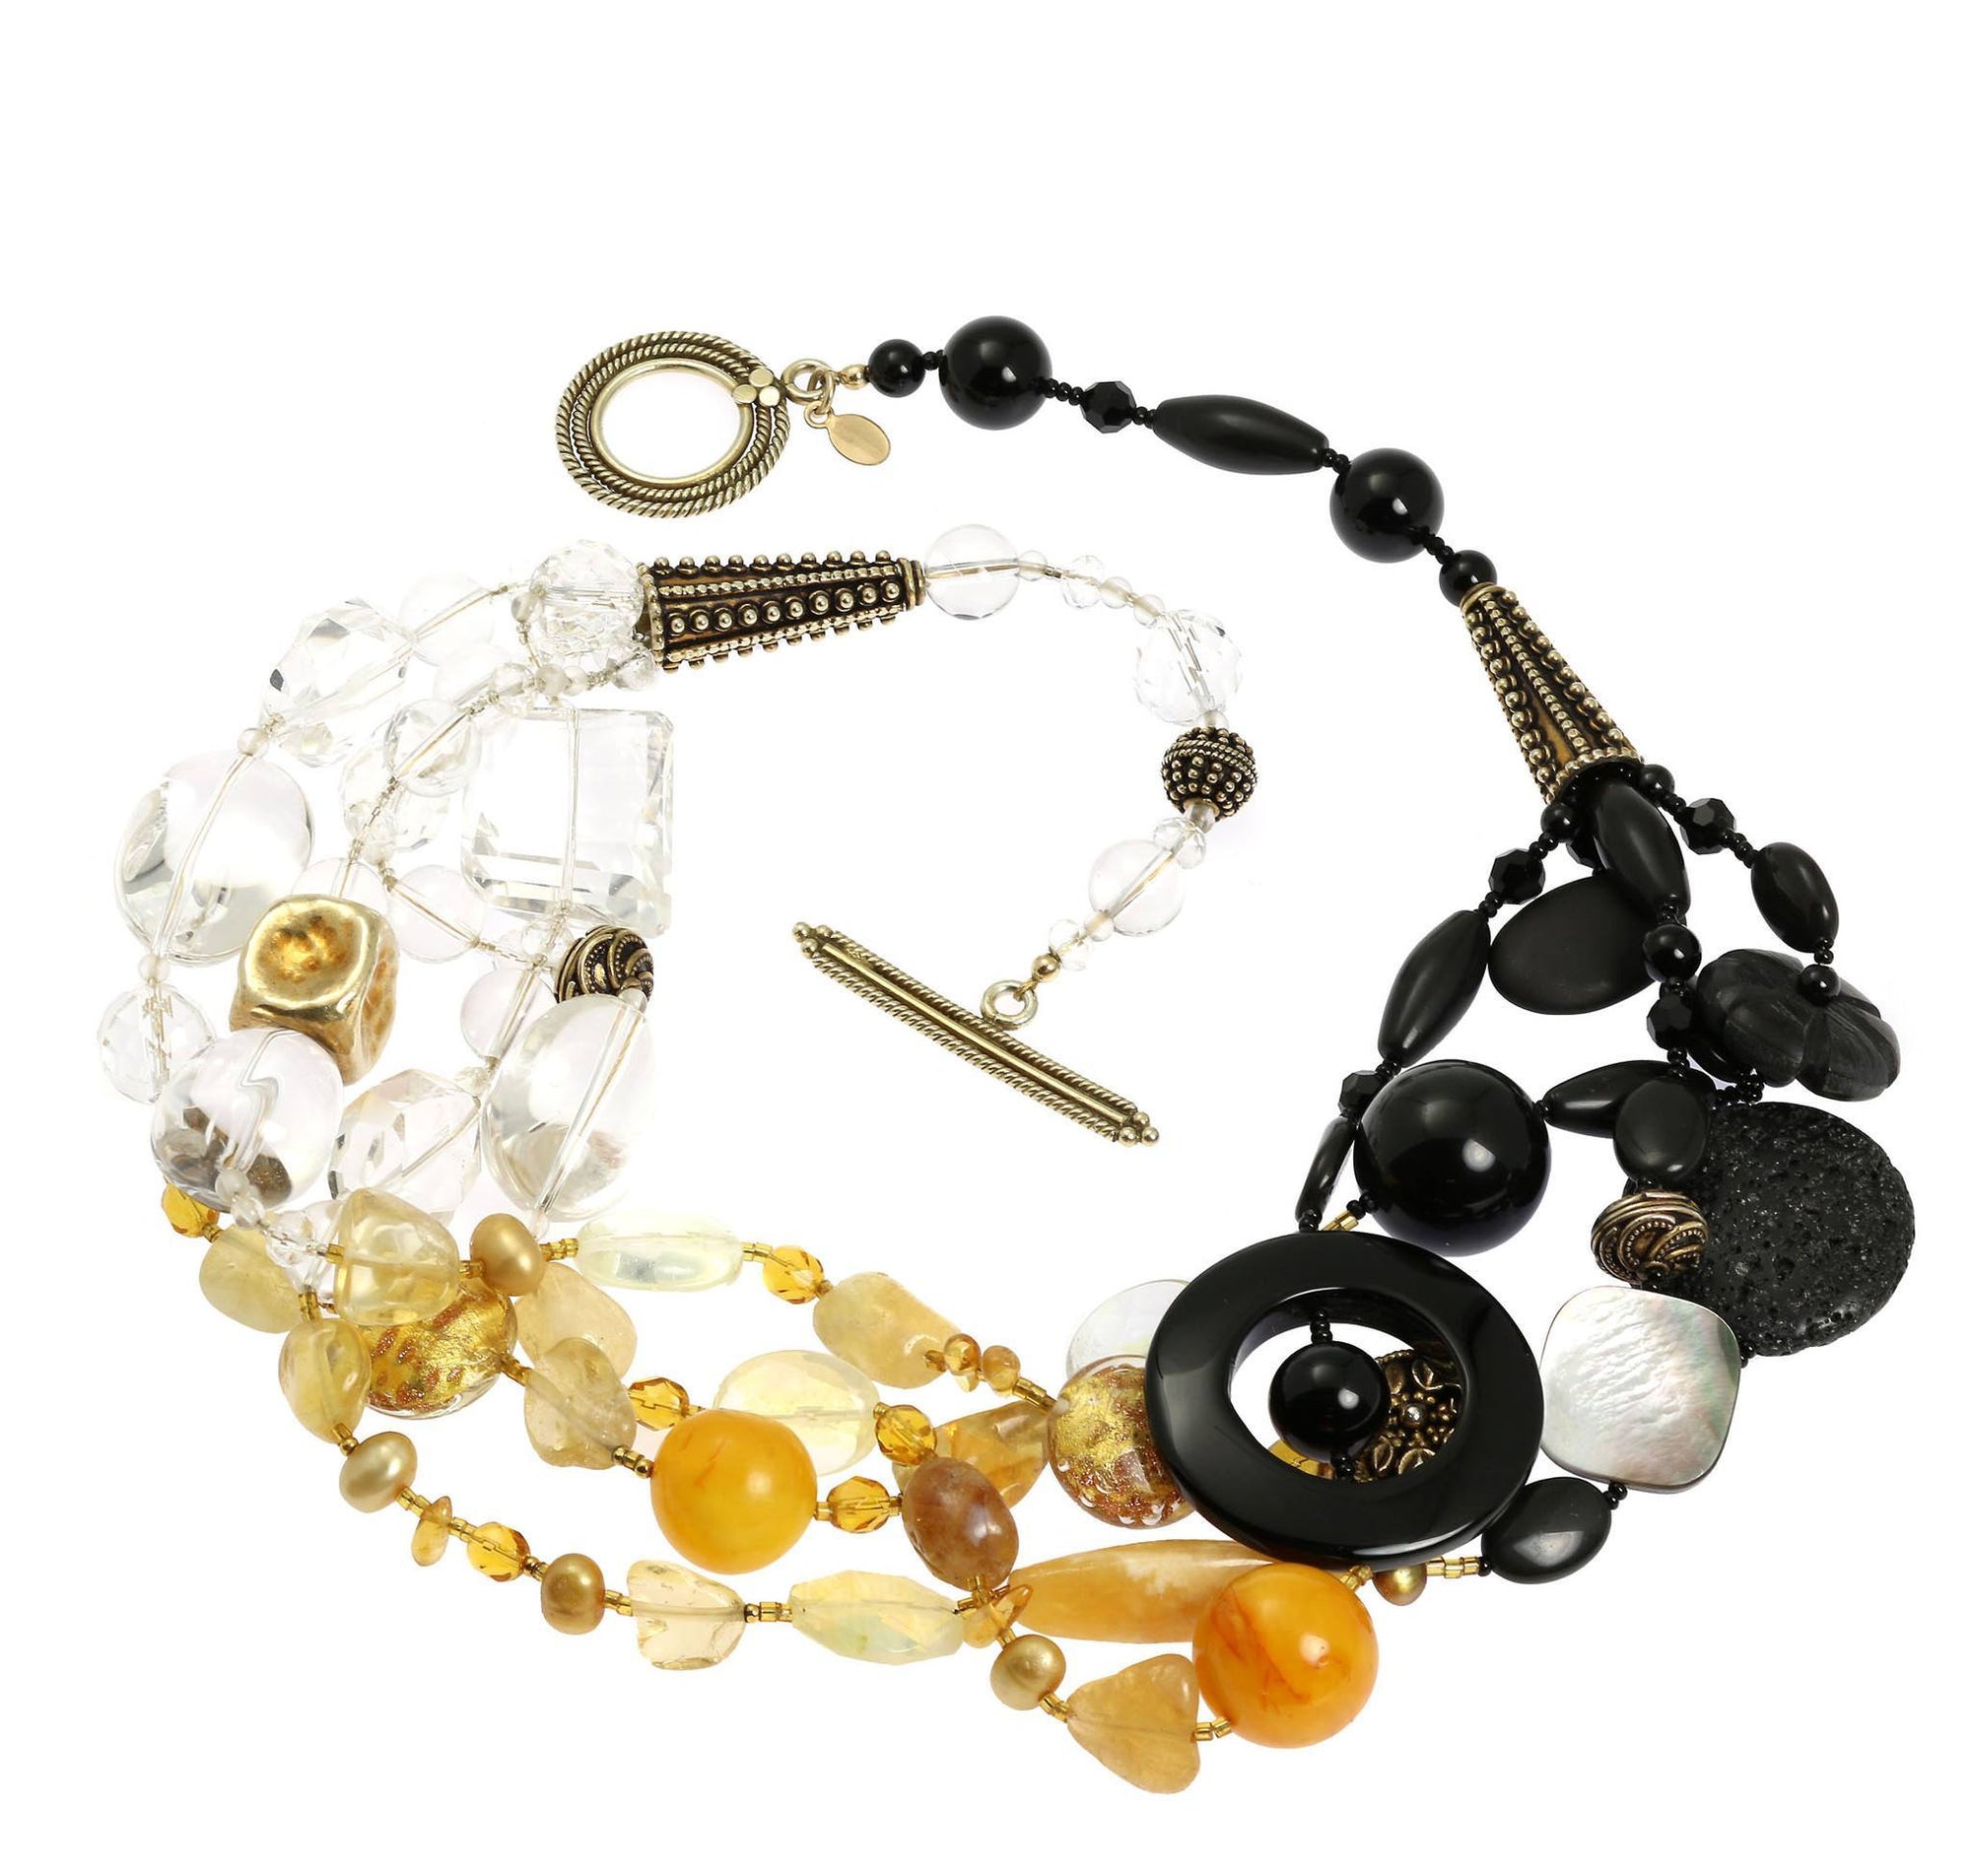 Detailed View of Crystal Quartz Onyx Amber Gemstone Necklace